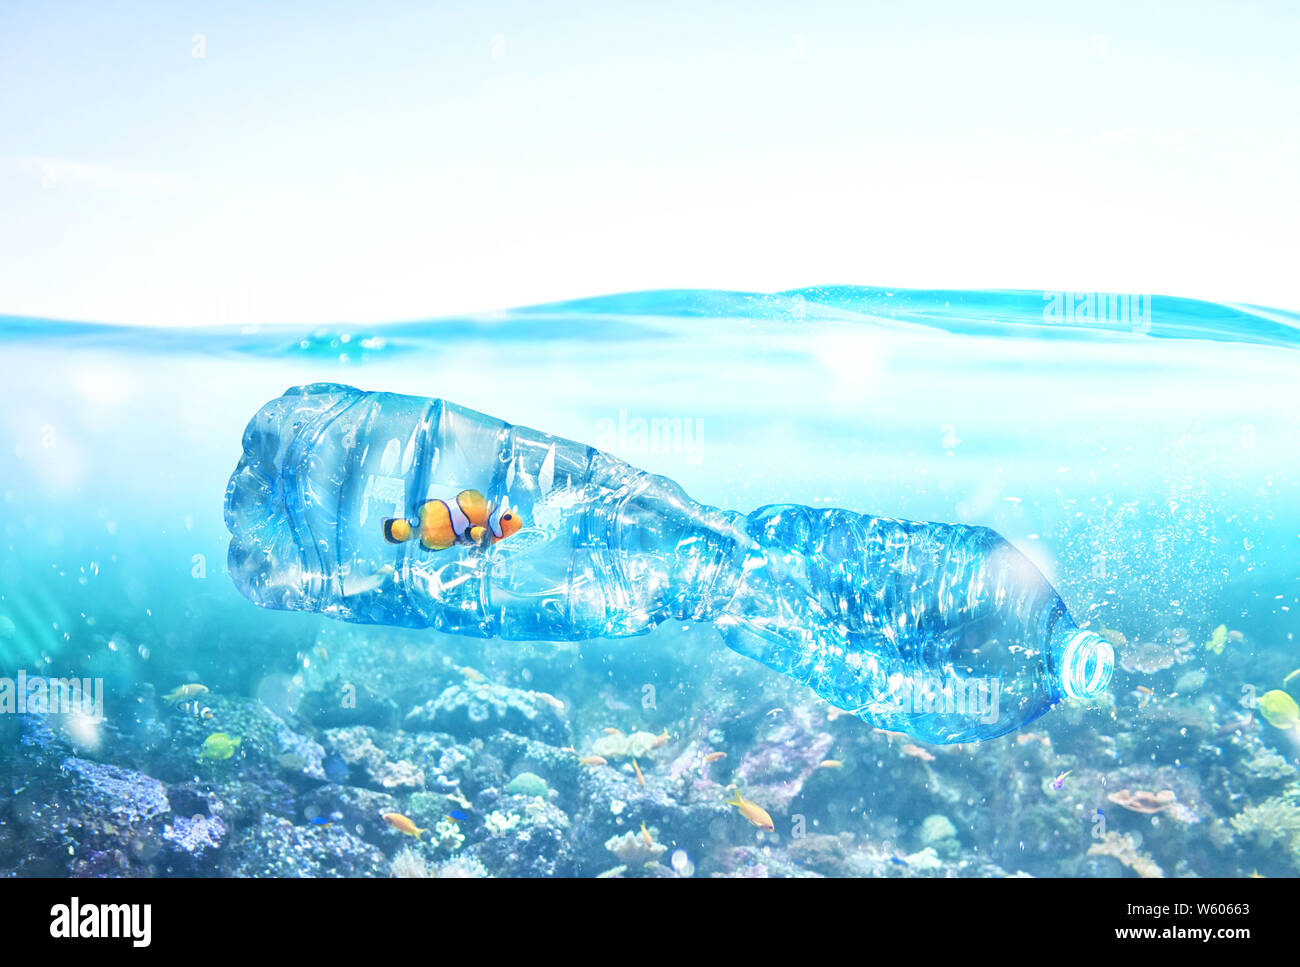 Fish trapped inside a bottle. Problem of plastic pollution under the sea concept. Stock Photo